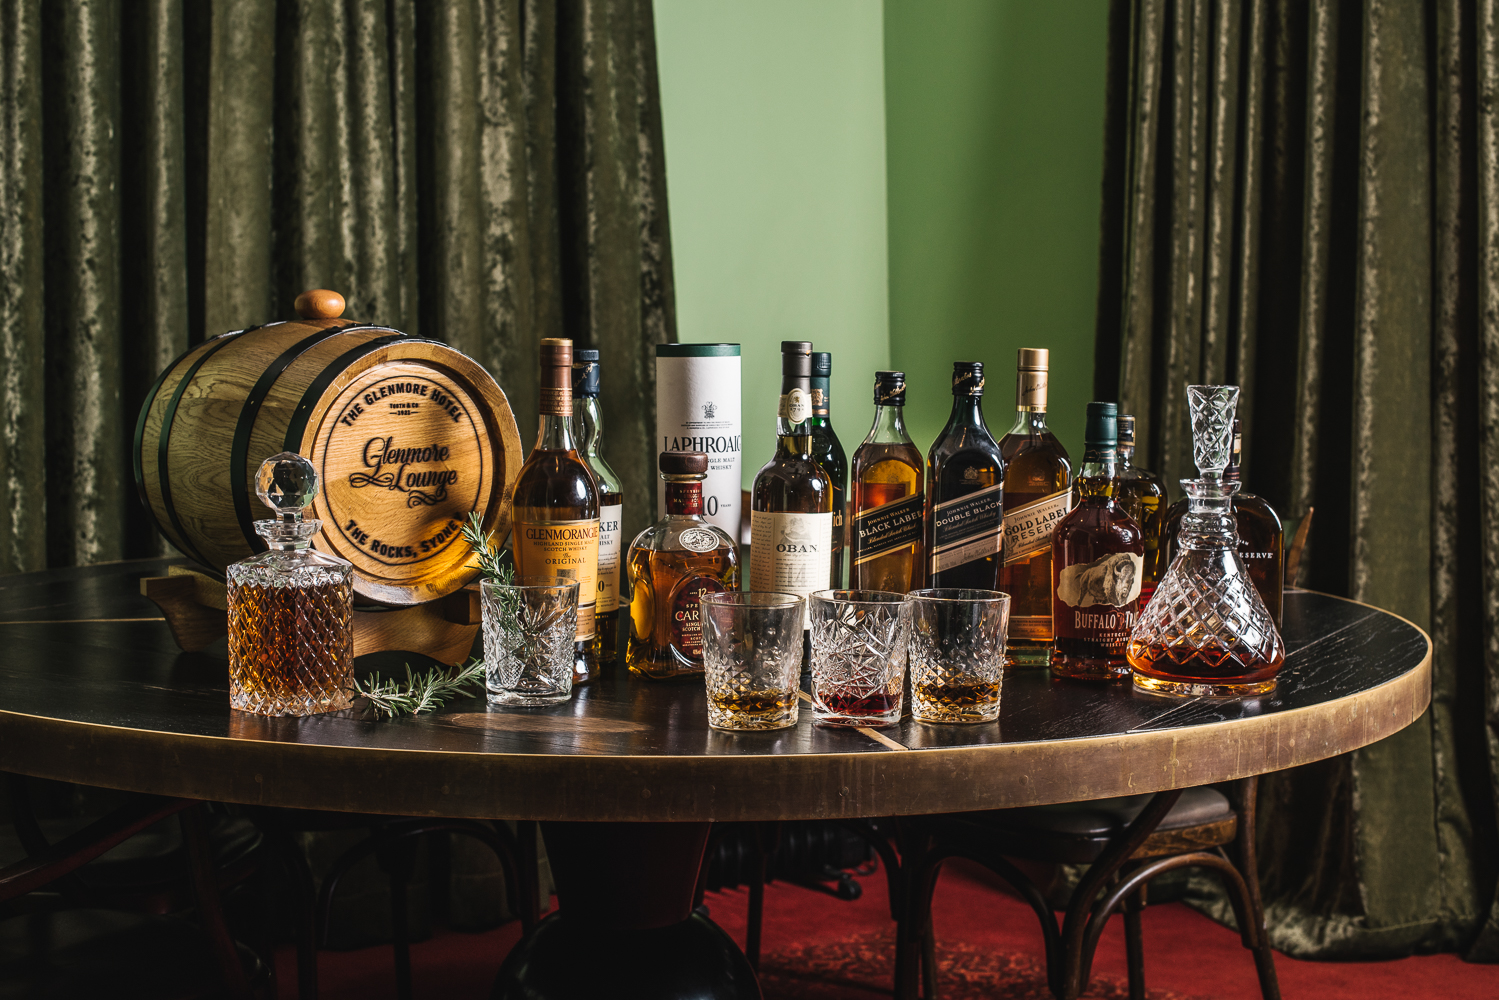 A month of whiskey at The Glenmore